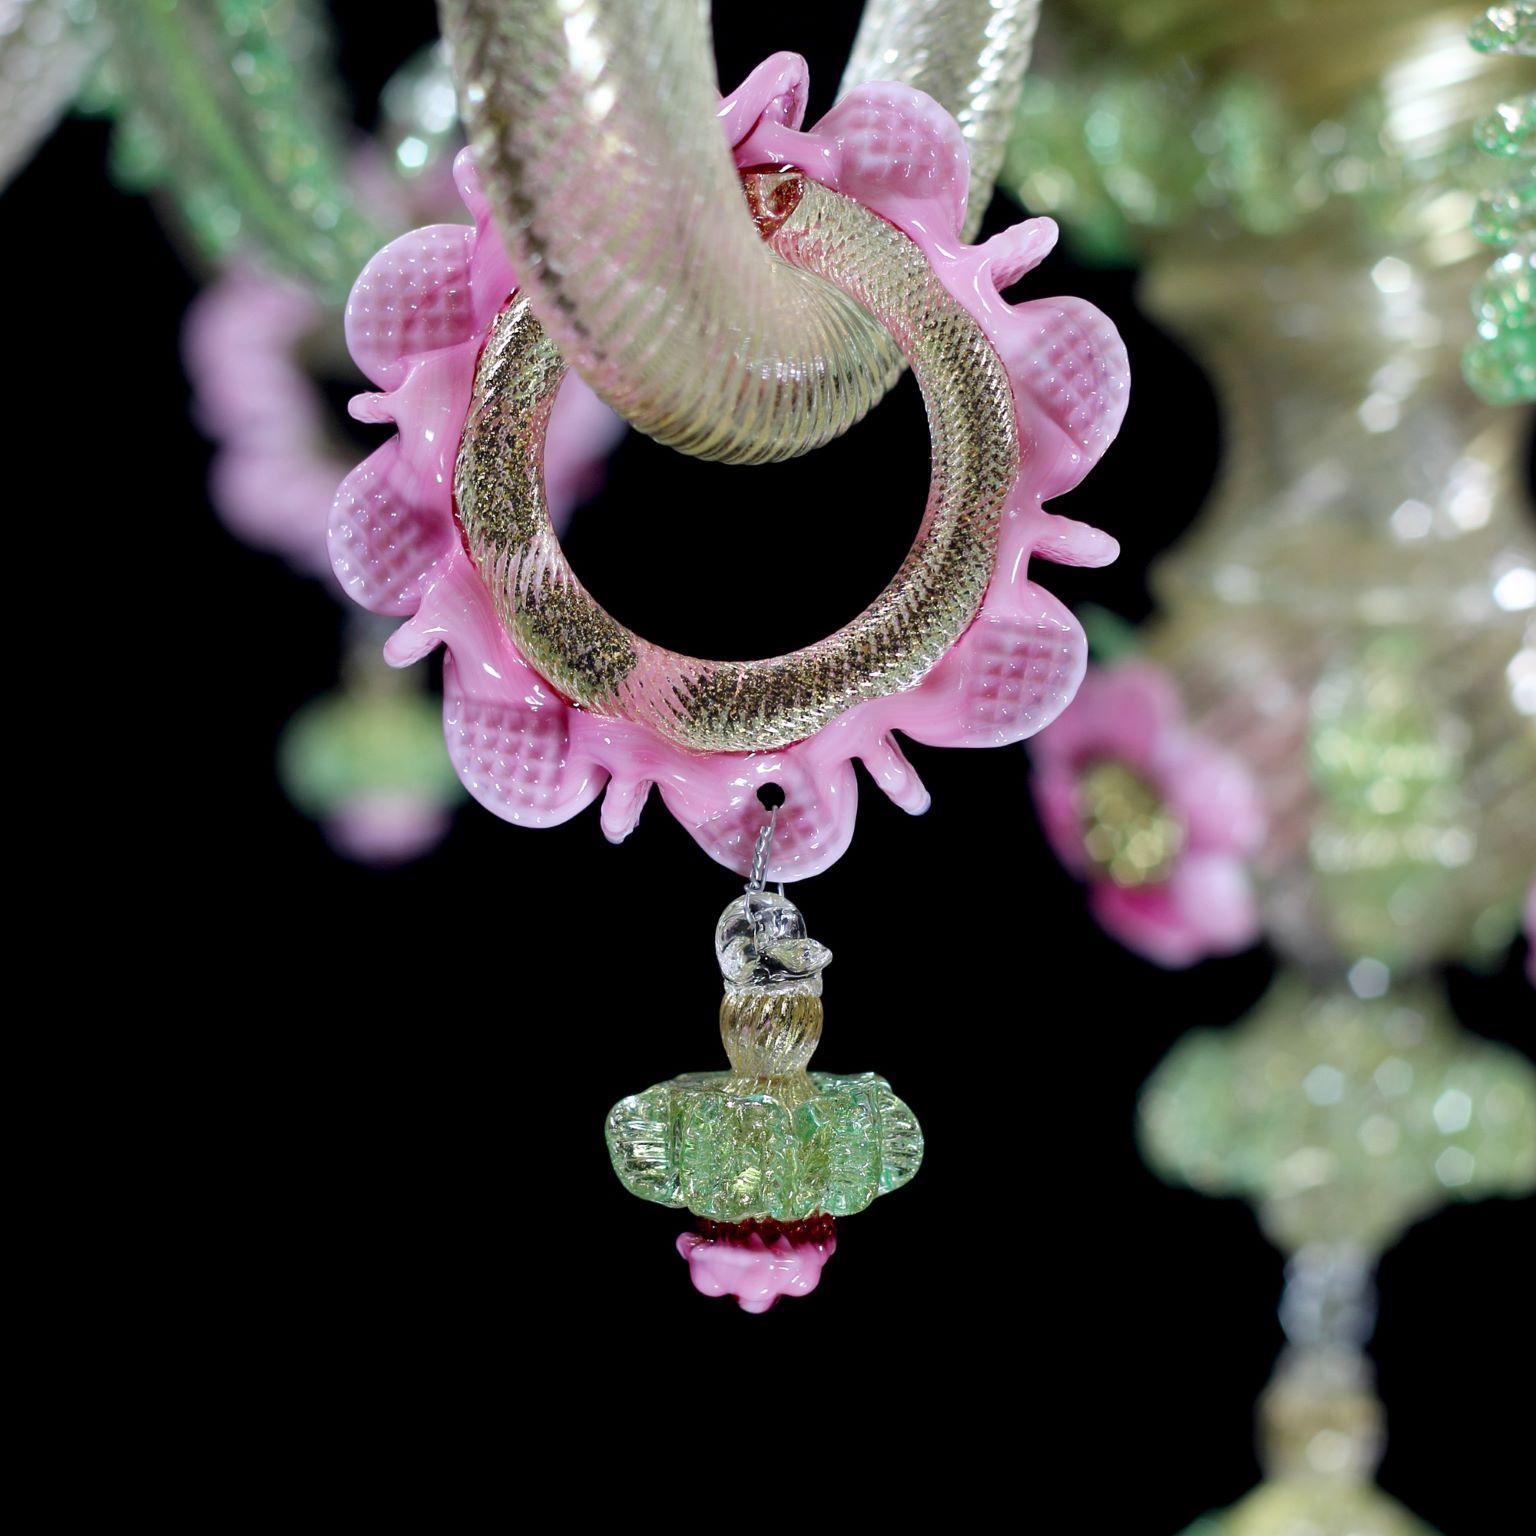 Artistic Chandelier 6 Arms Gold Murano Glass Pink and Gree Details by Multiforme In New Condition For Sale In Trebaseleghe, IT